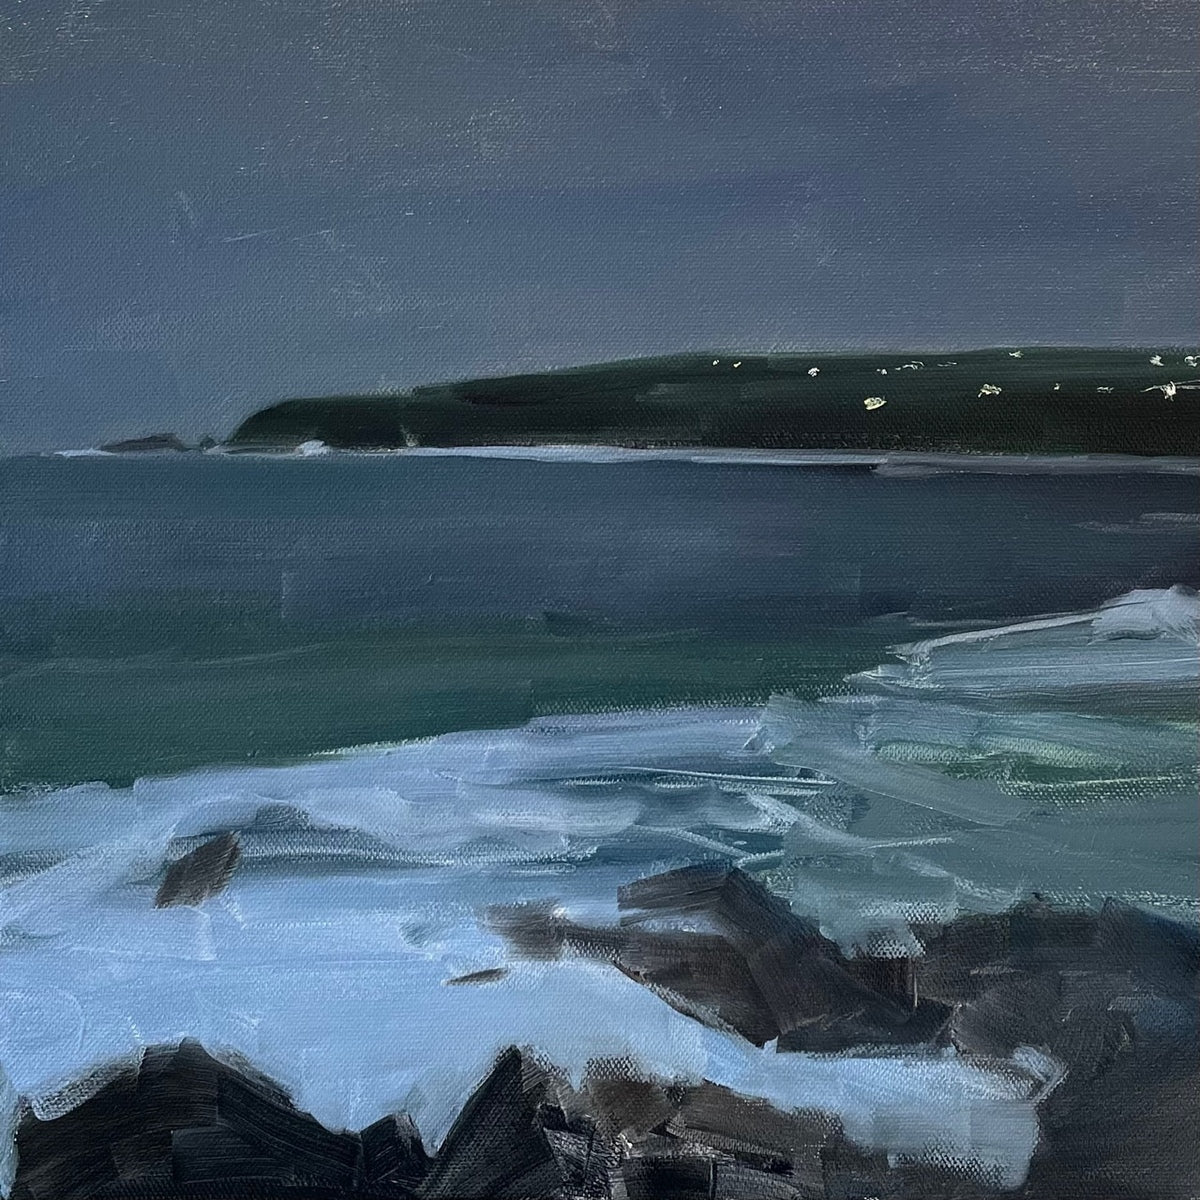 Pouch Cove at night (night waves)